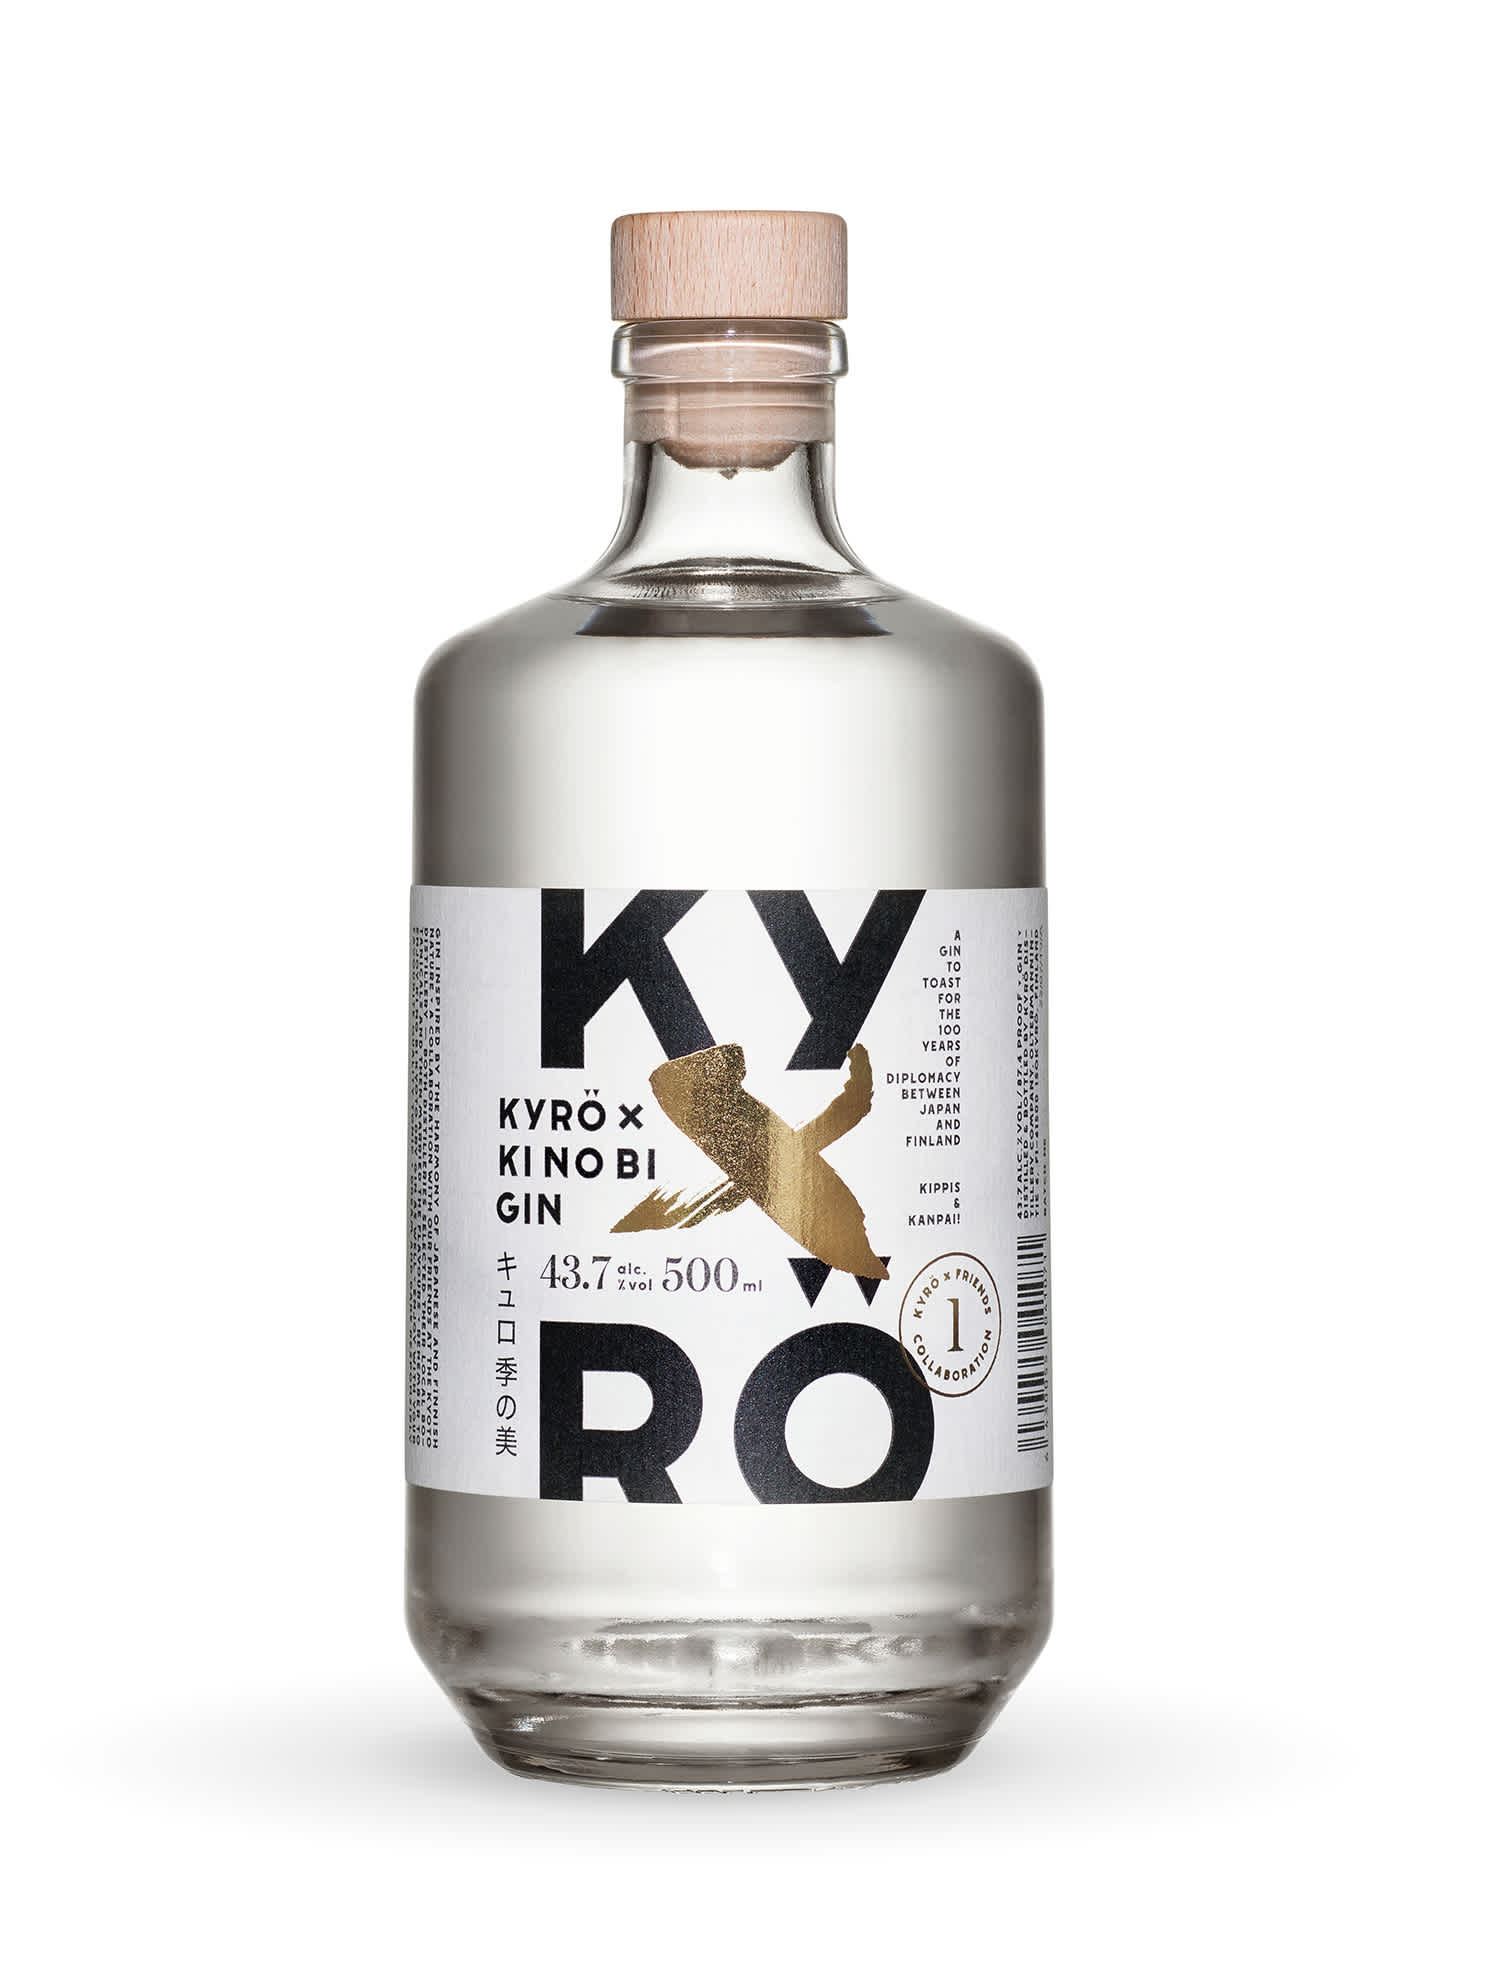 Product photo: a clear, 500ml glass bottle filled with Kyrö x K made by the Kyrö Distillery Company in Isokyrö, Finland. 